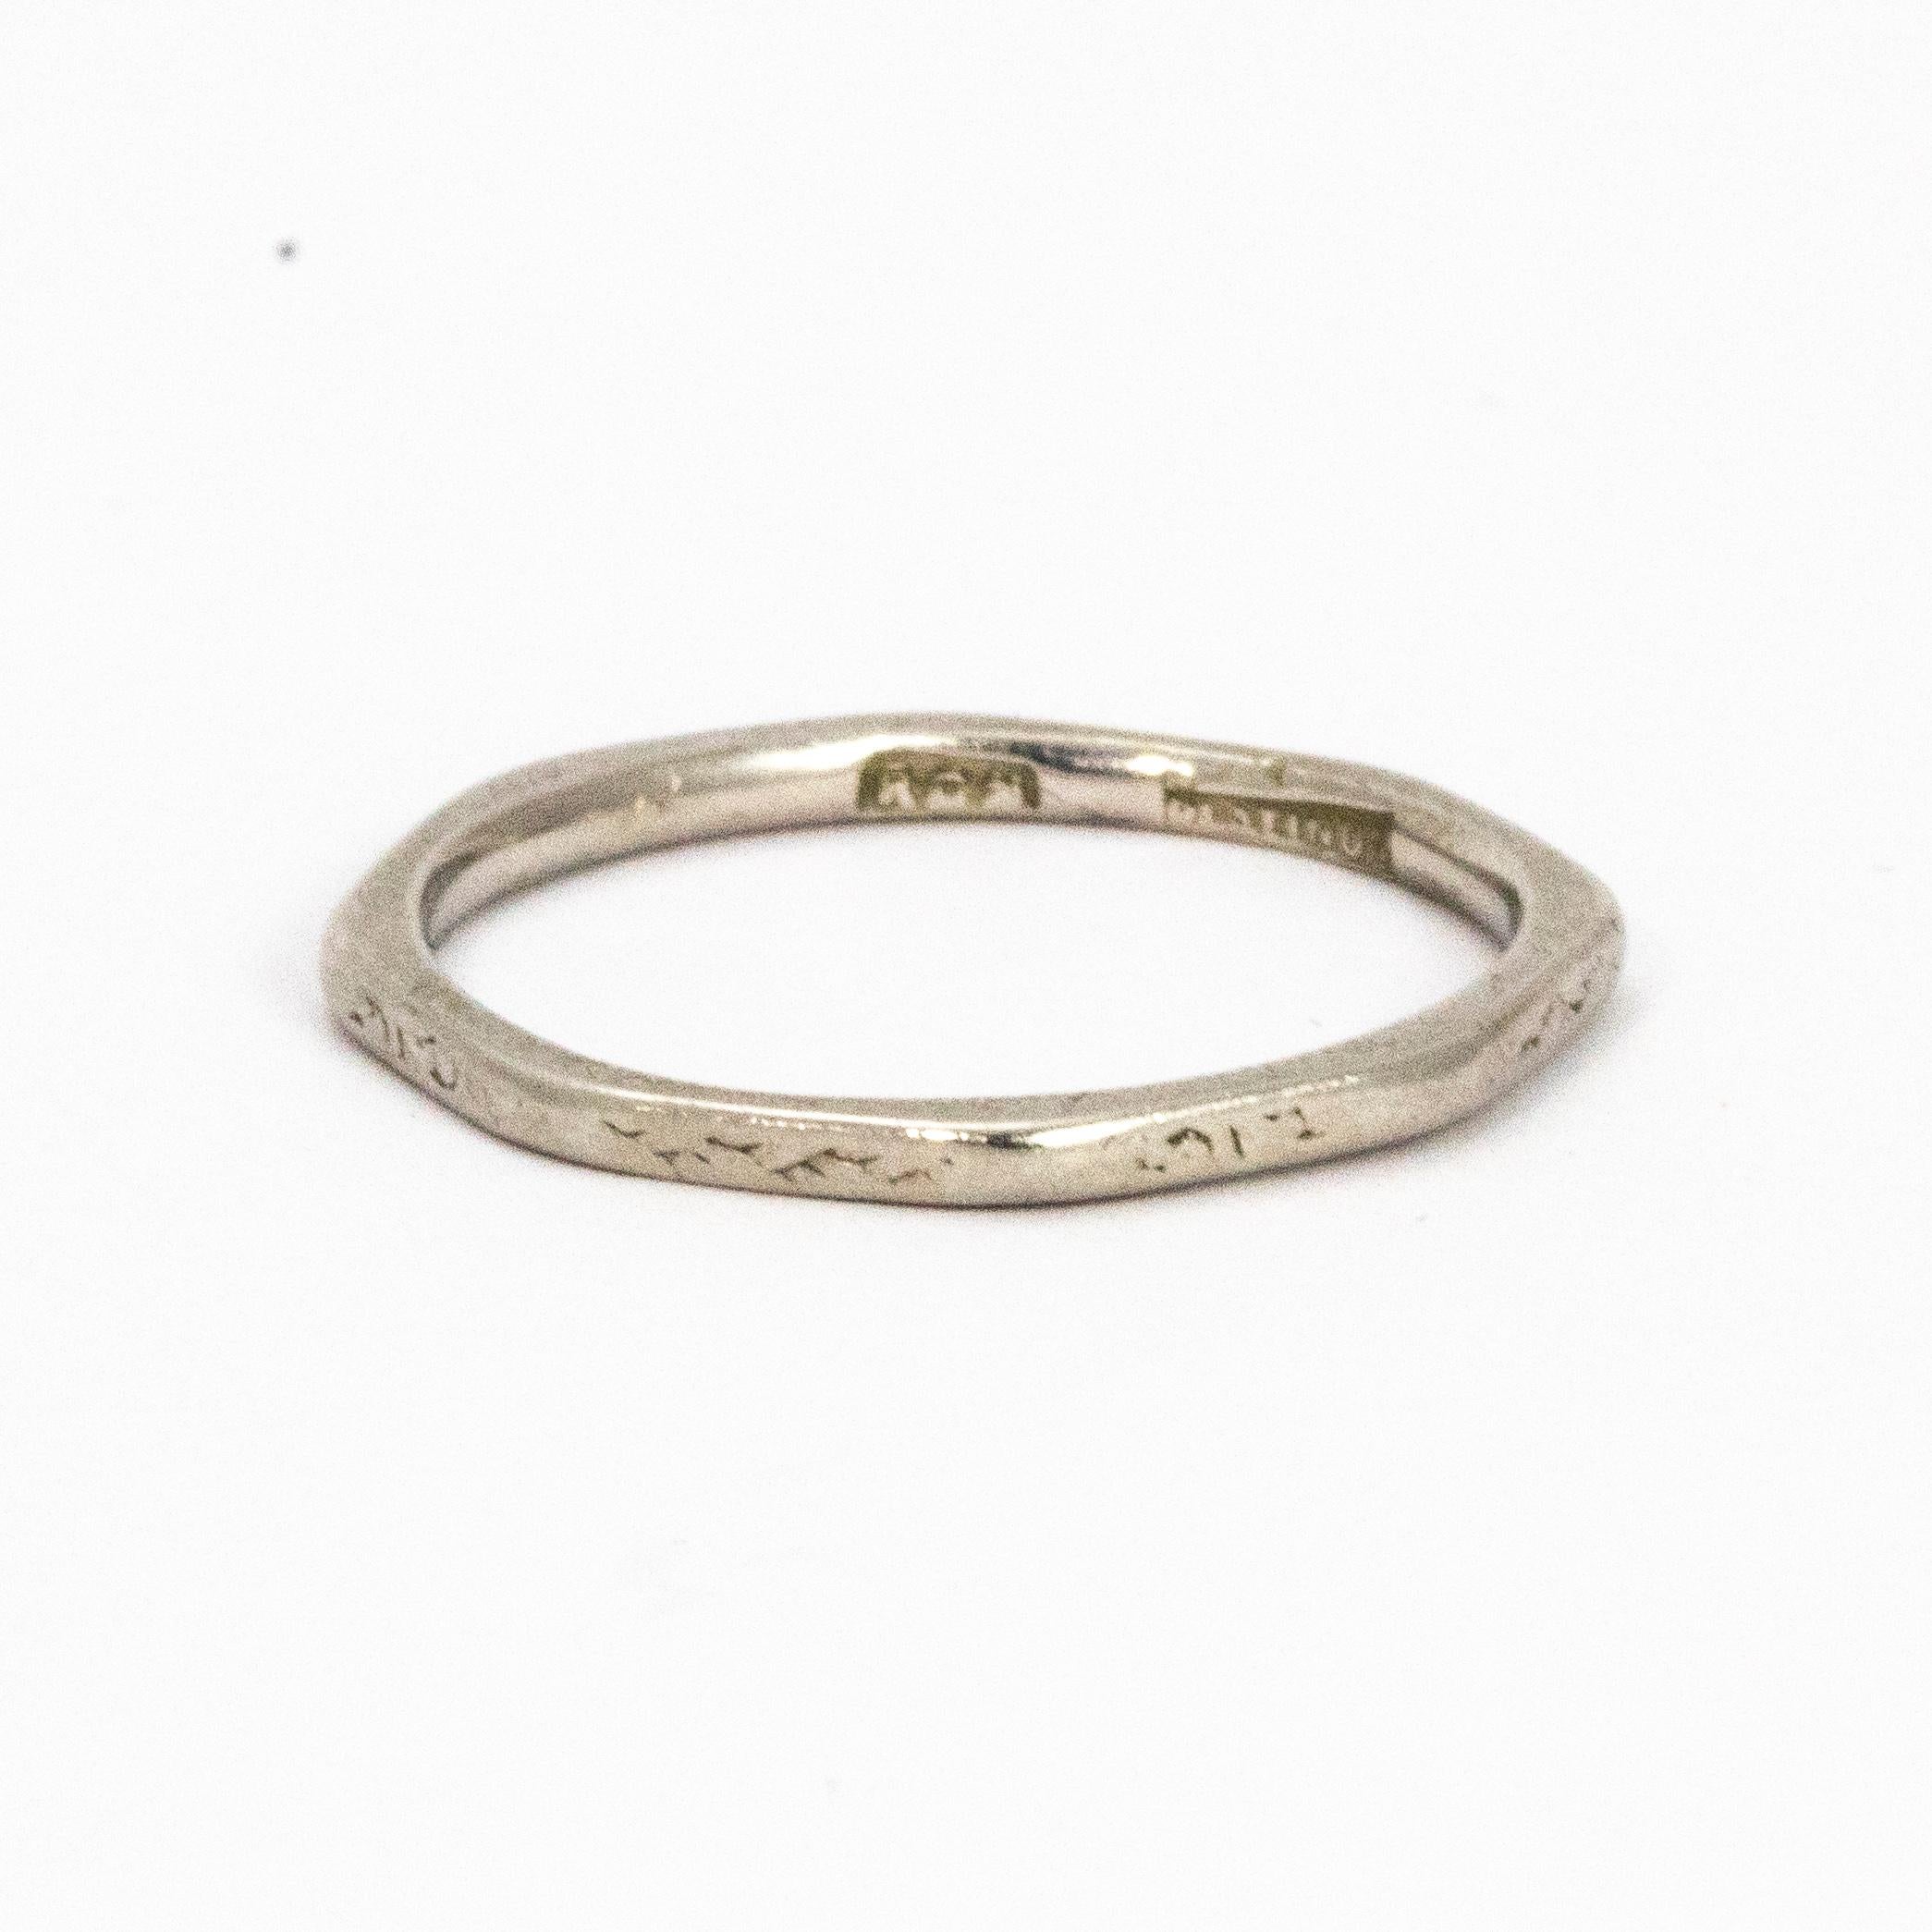 This ring looks quite geometric with its straight edges and has slight detail to every side. 

Ring size: K or 5